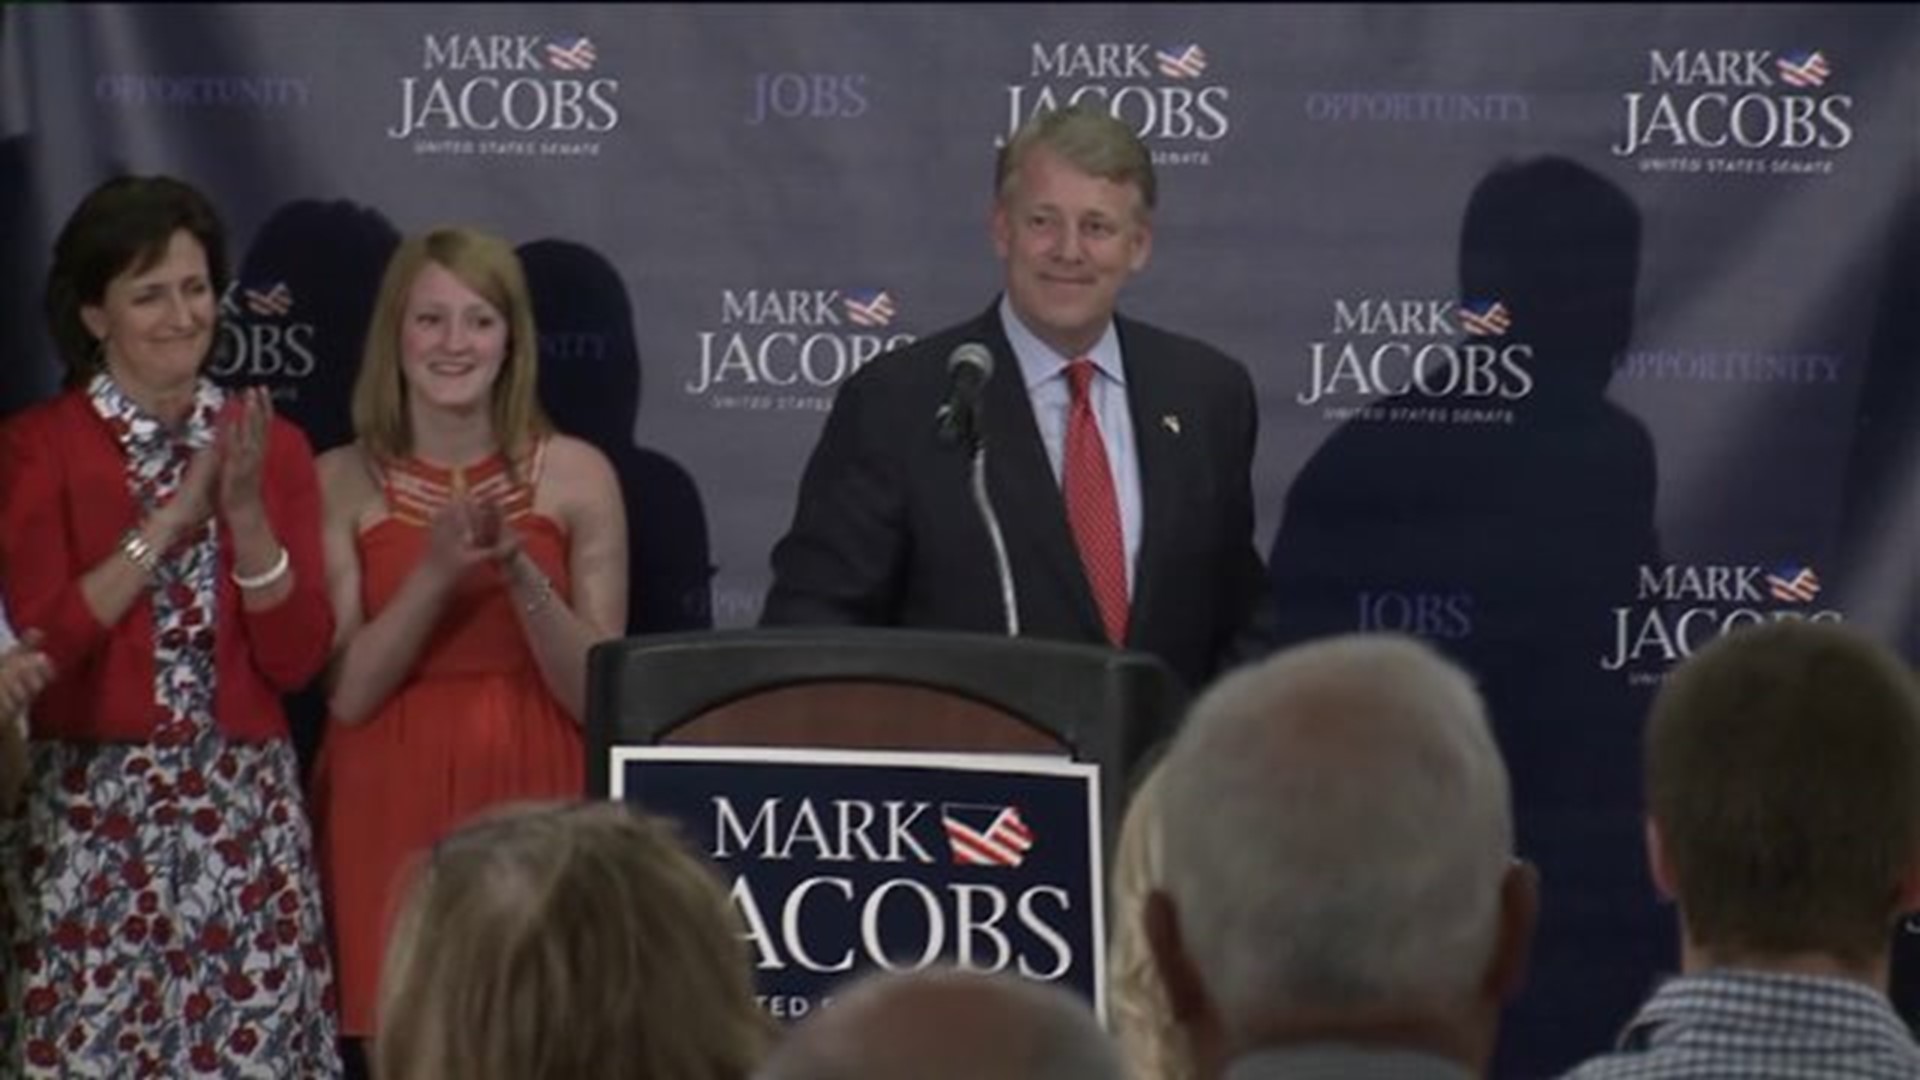 Jacobs concedes